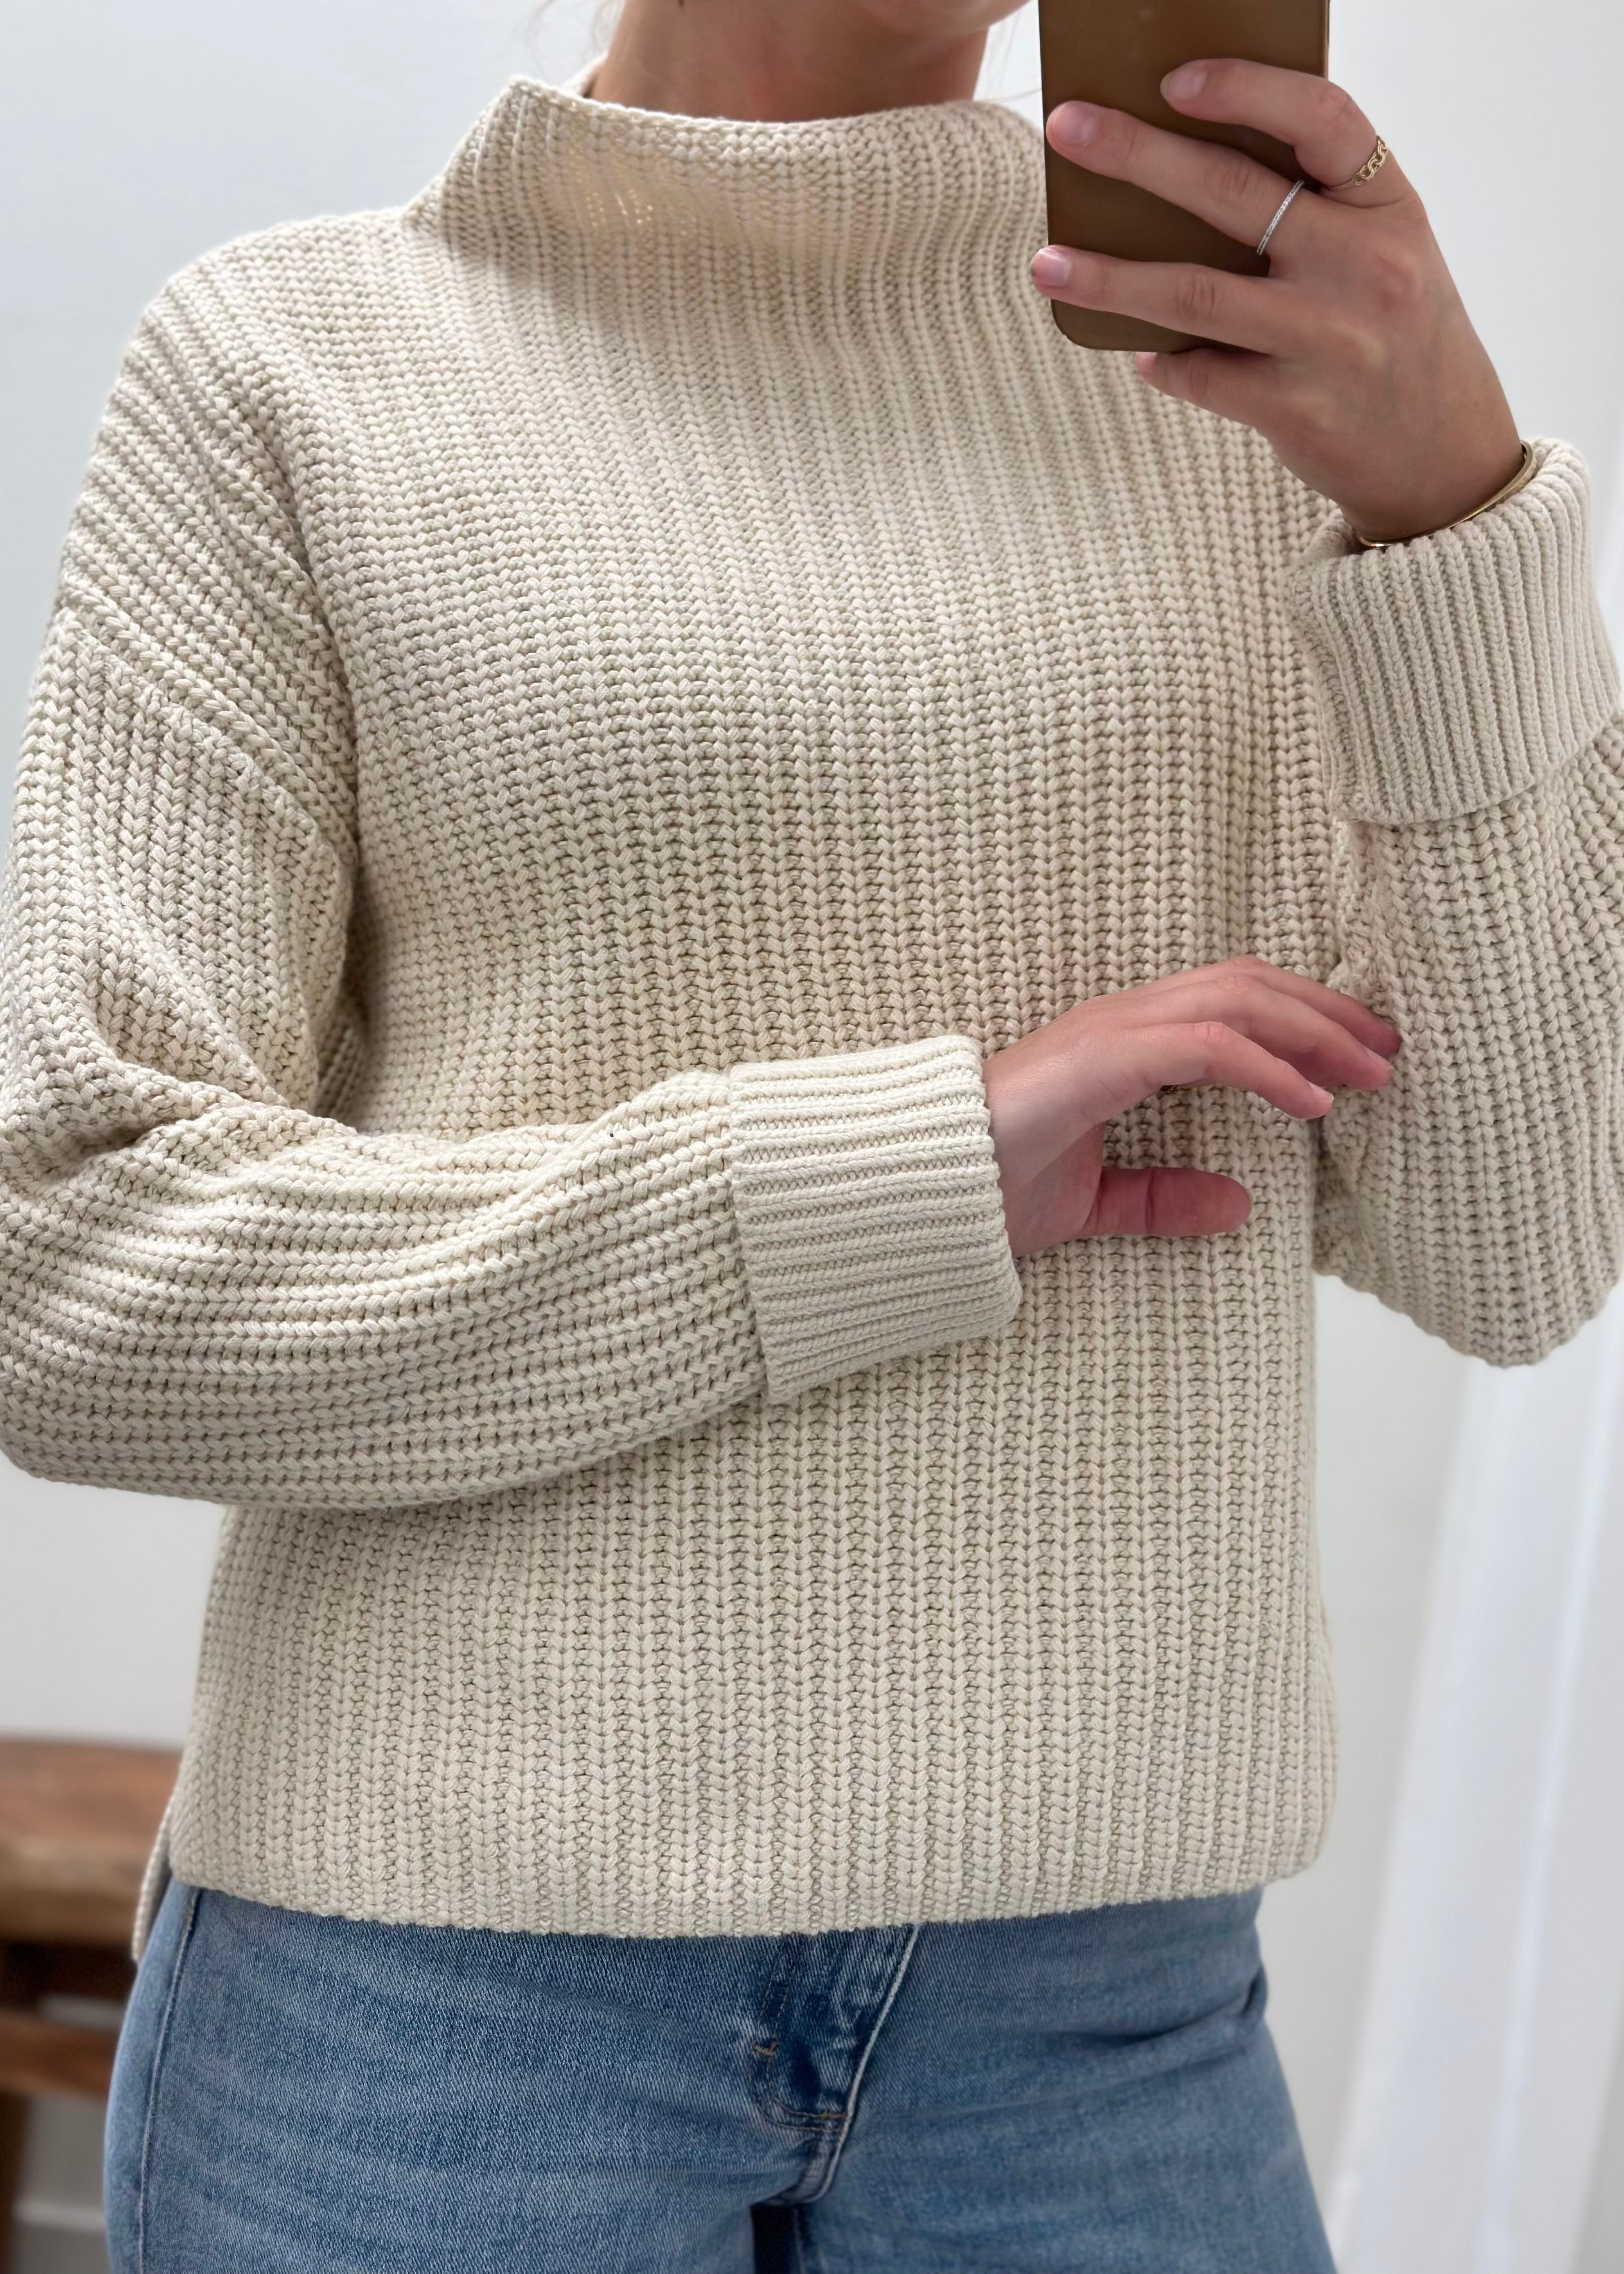 SELECTED FEMME - SELMA LS KNIT PULLOVER - BIRCH